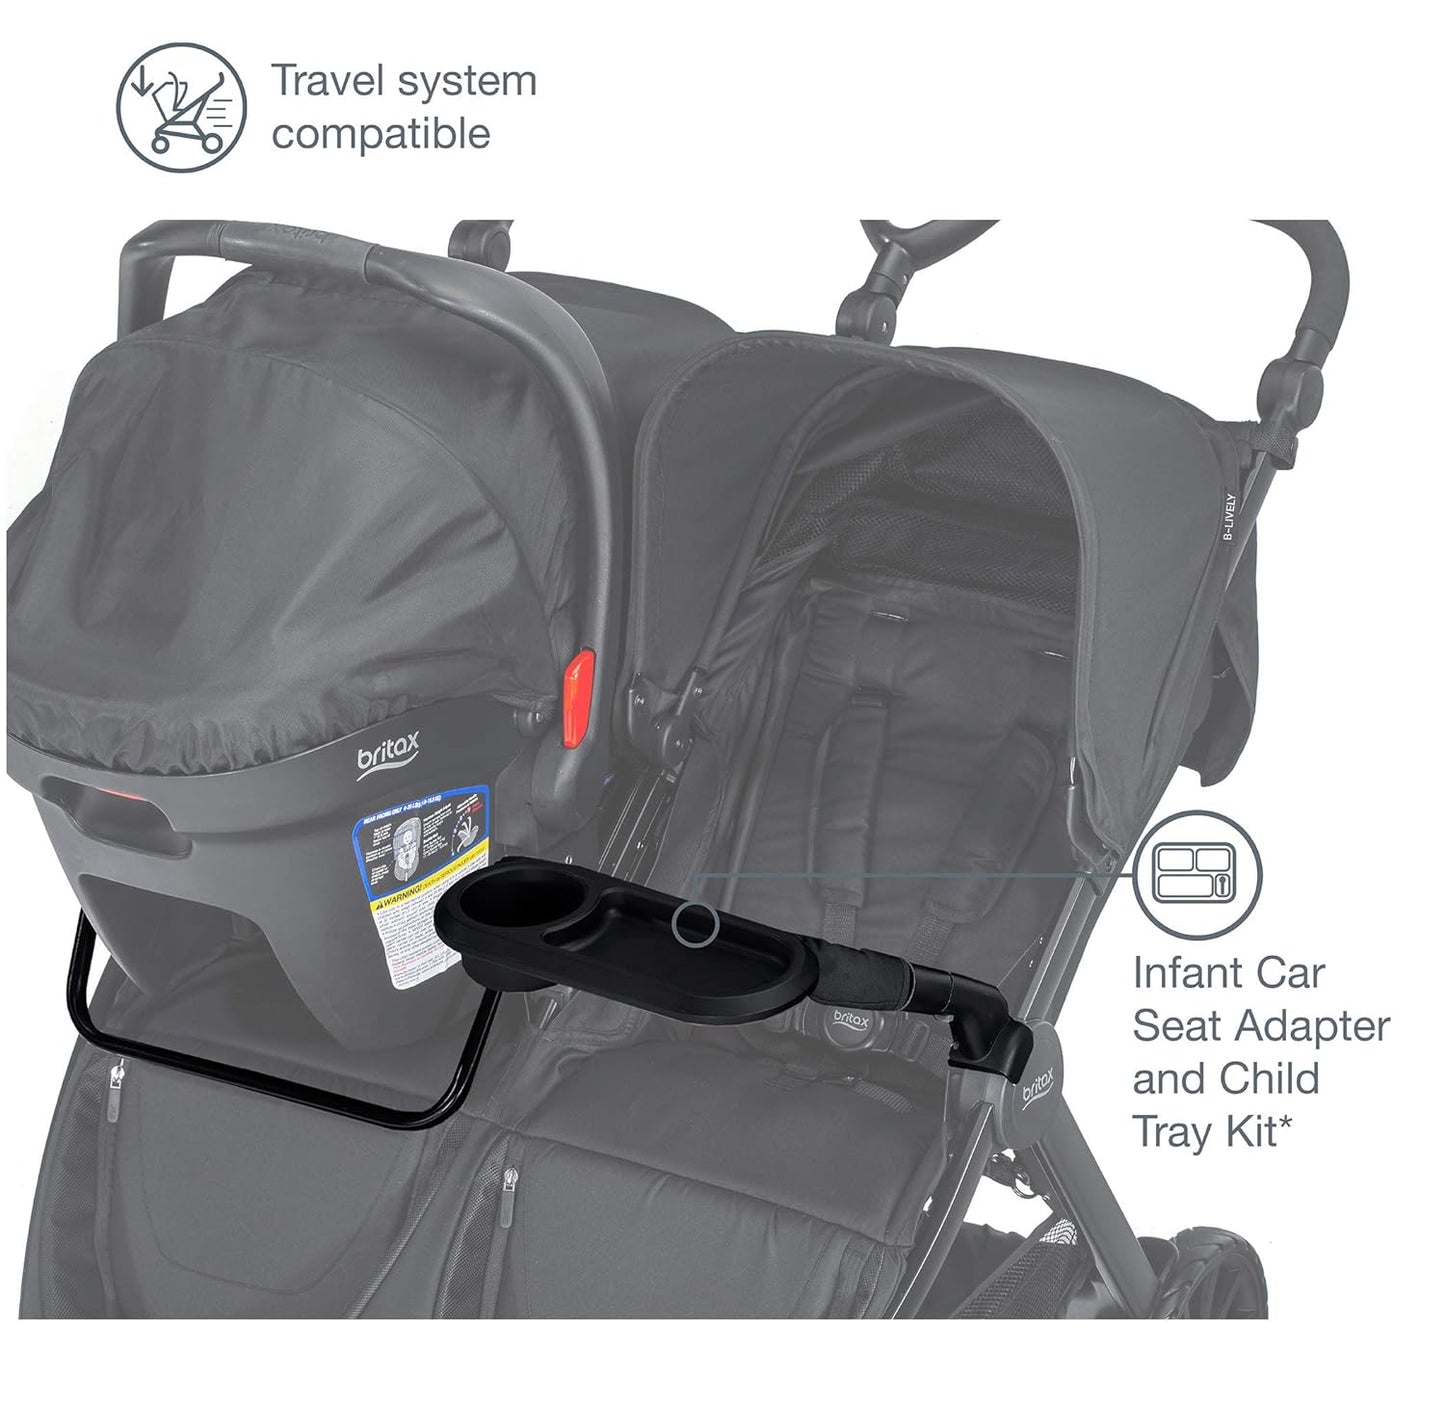 Britax B-Lively Double Stroller Infant Car Seat Adapter & Child Tray Kit